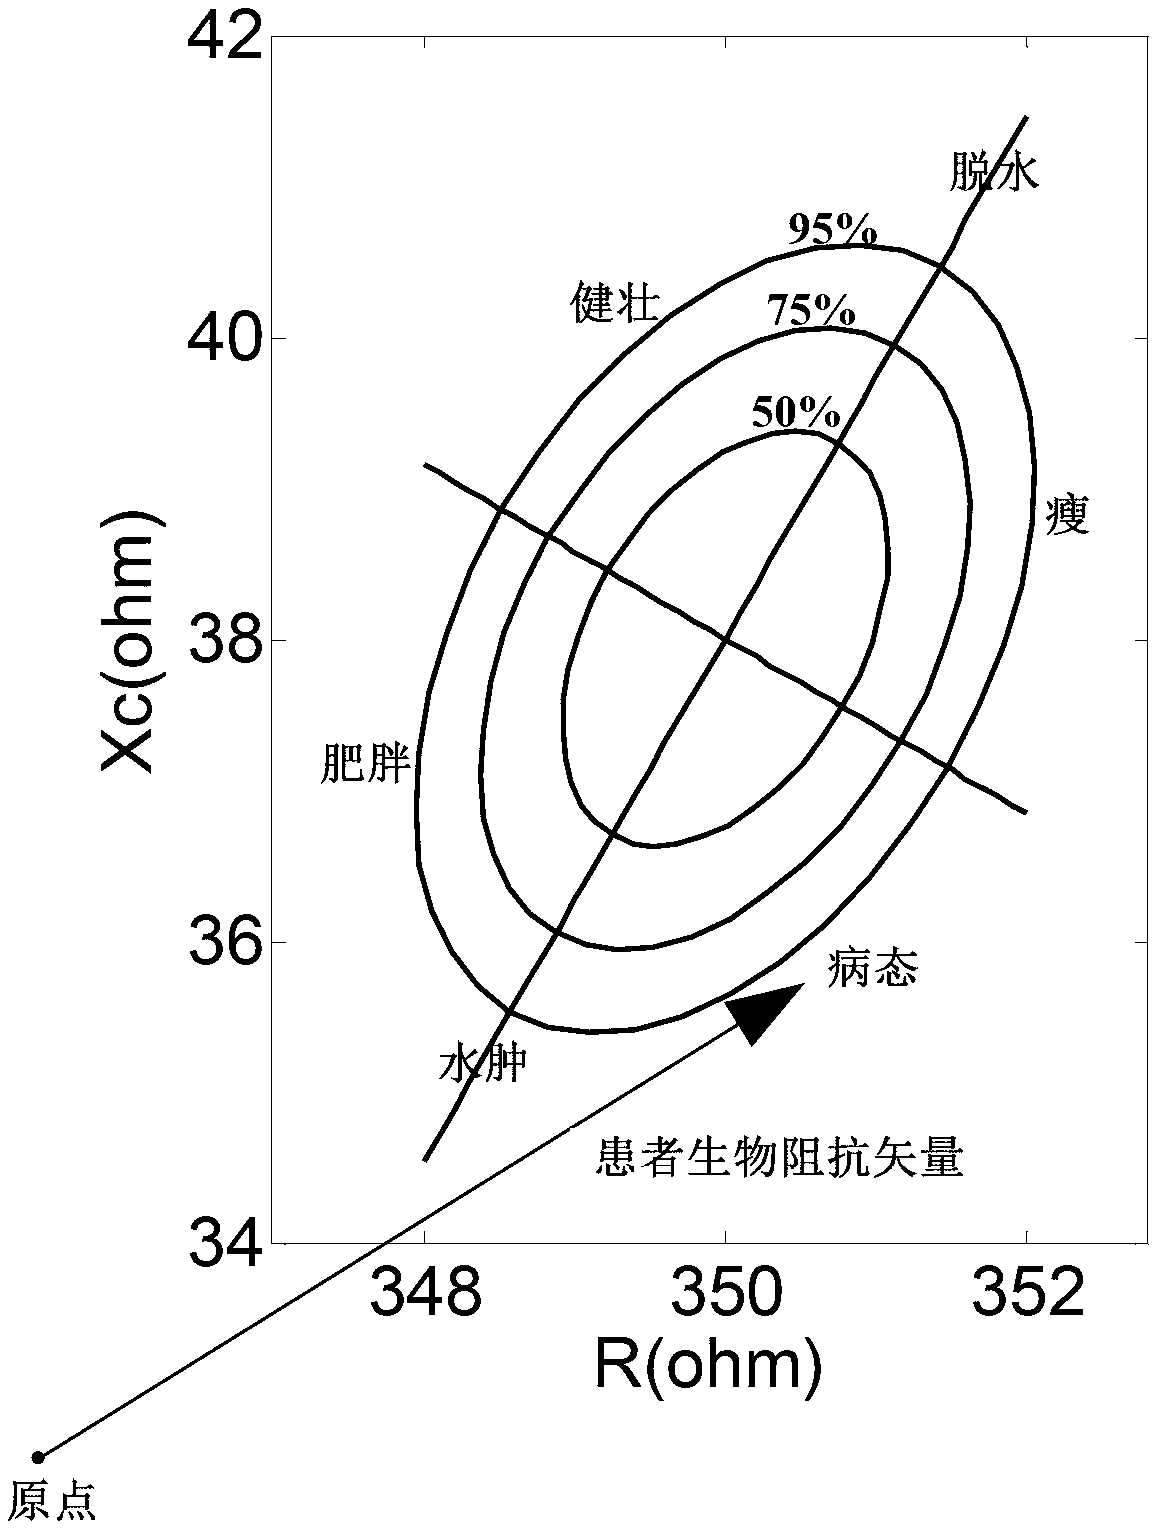 Method and device for hepatopathy nutrition state detection